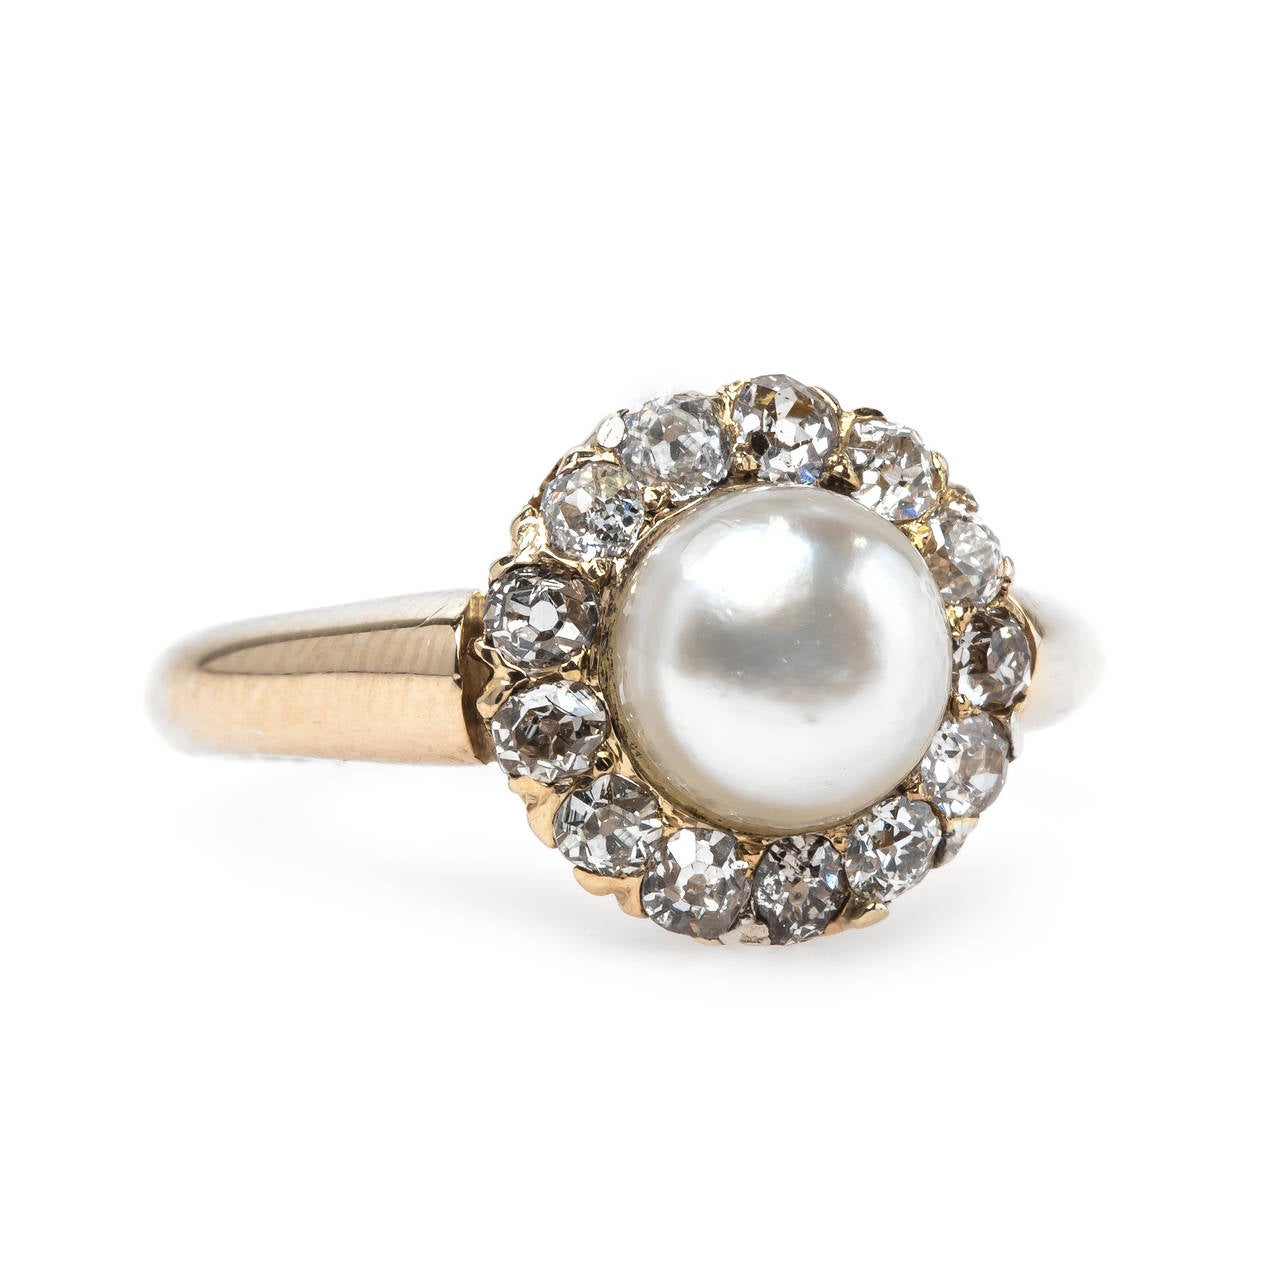 Darley is an alluring authentic Victorian Era (circa 1885) 14k yellow gold halo style ring. The center button shaped pearl is 6.9mm in diameter, slightly cream in color and complete with a beautiful luster. Our gemology team believes the pearl is